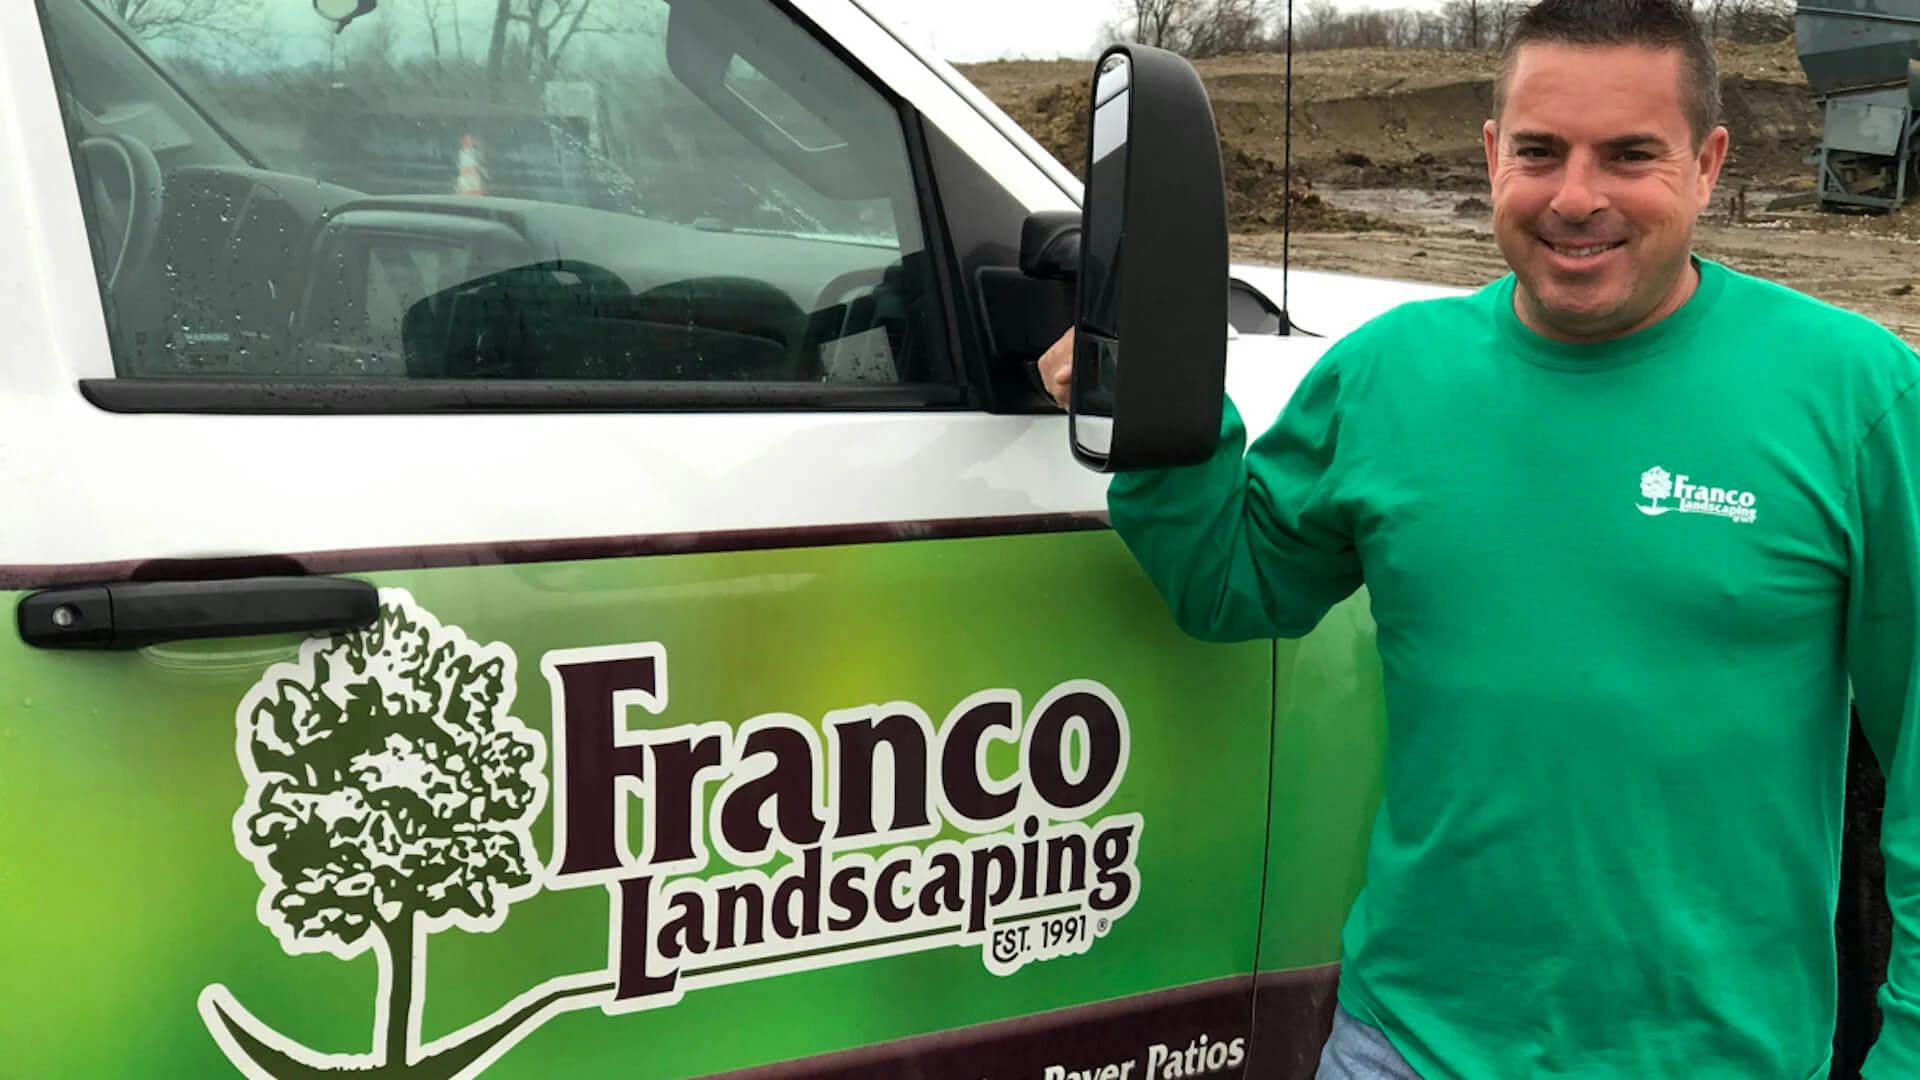 Brian Franco next to a Franco Landscaping truck